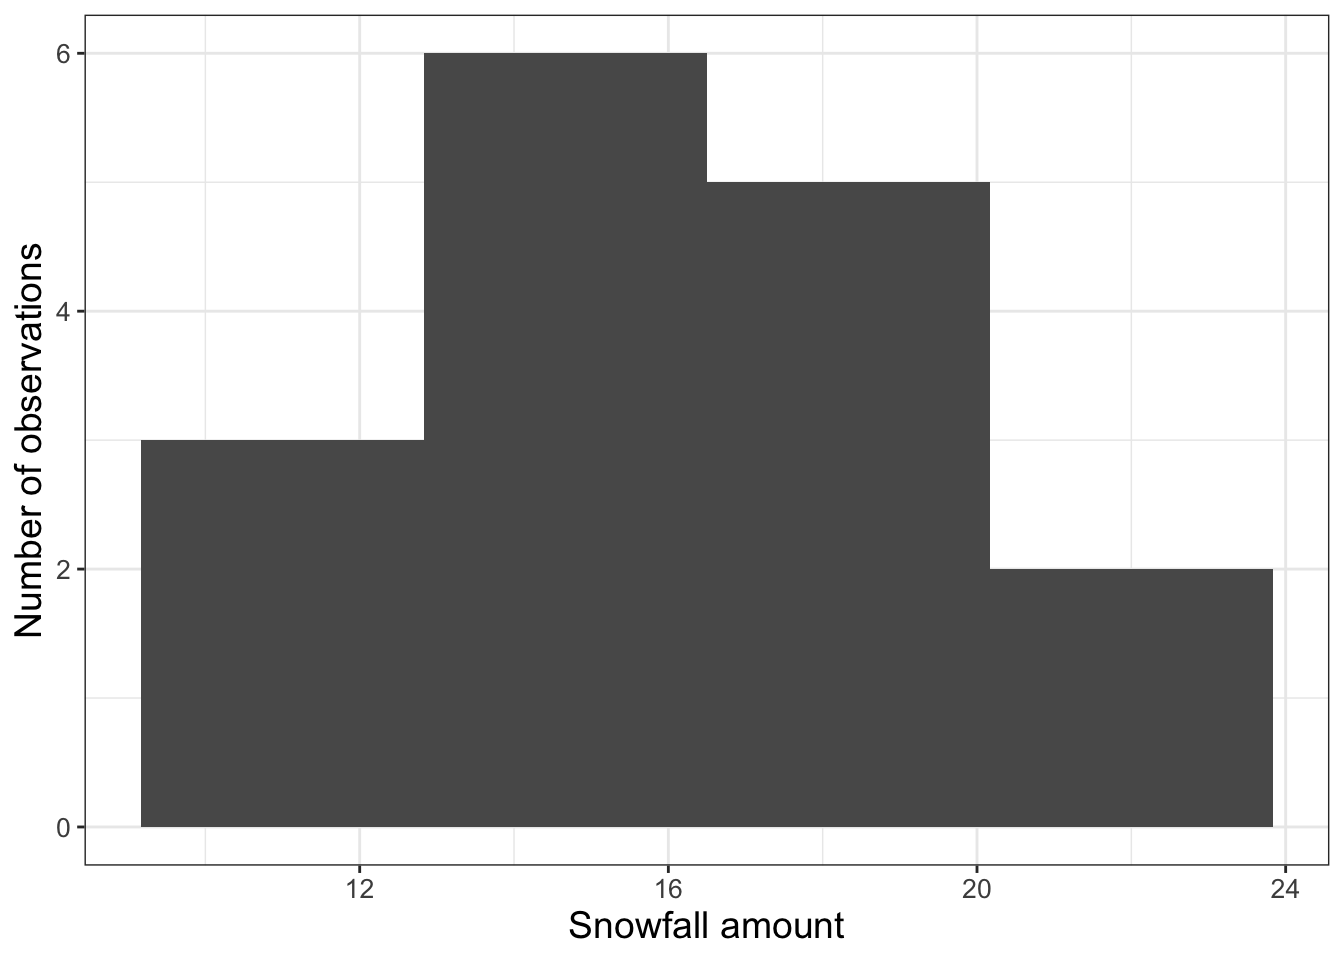 Adjusted histogram of snowfall data in Table \@ref(tab:snow-table) with the number of bins set to 4.